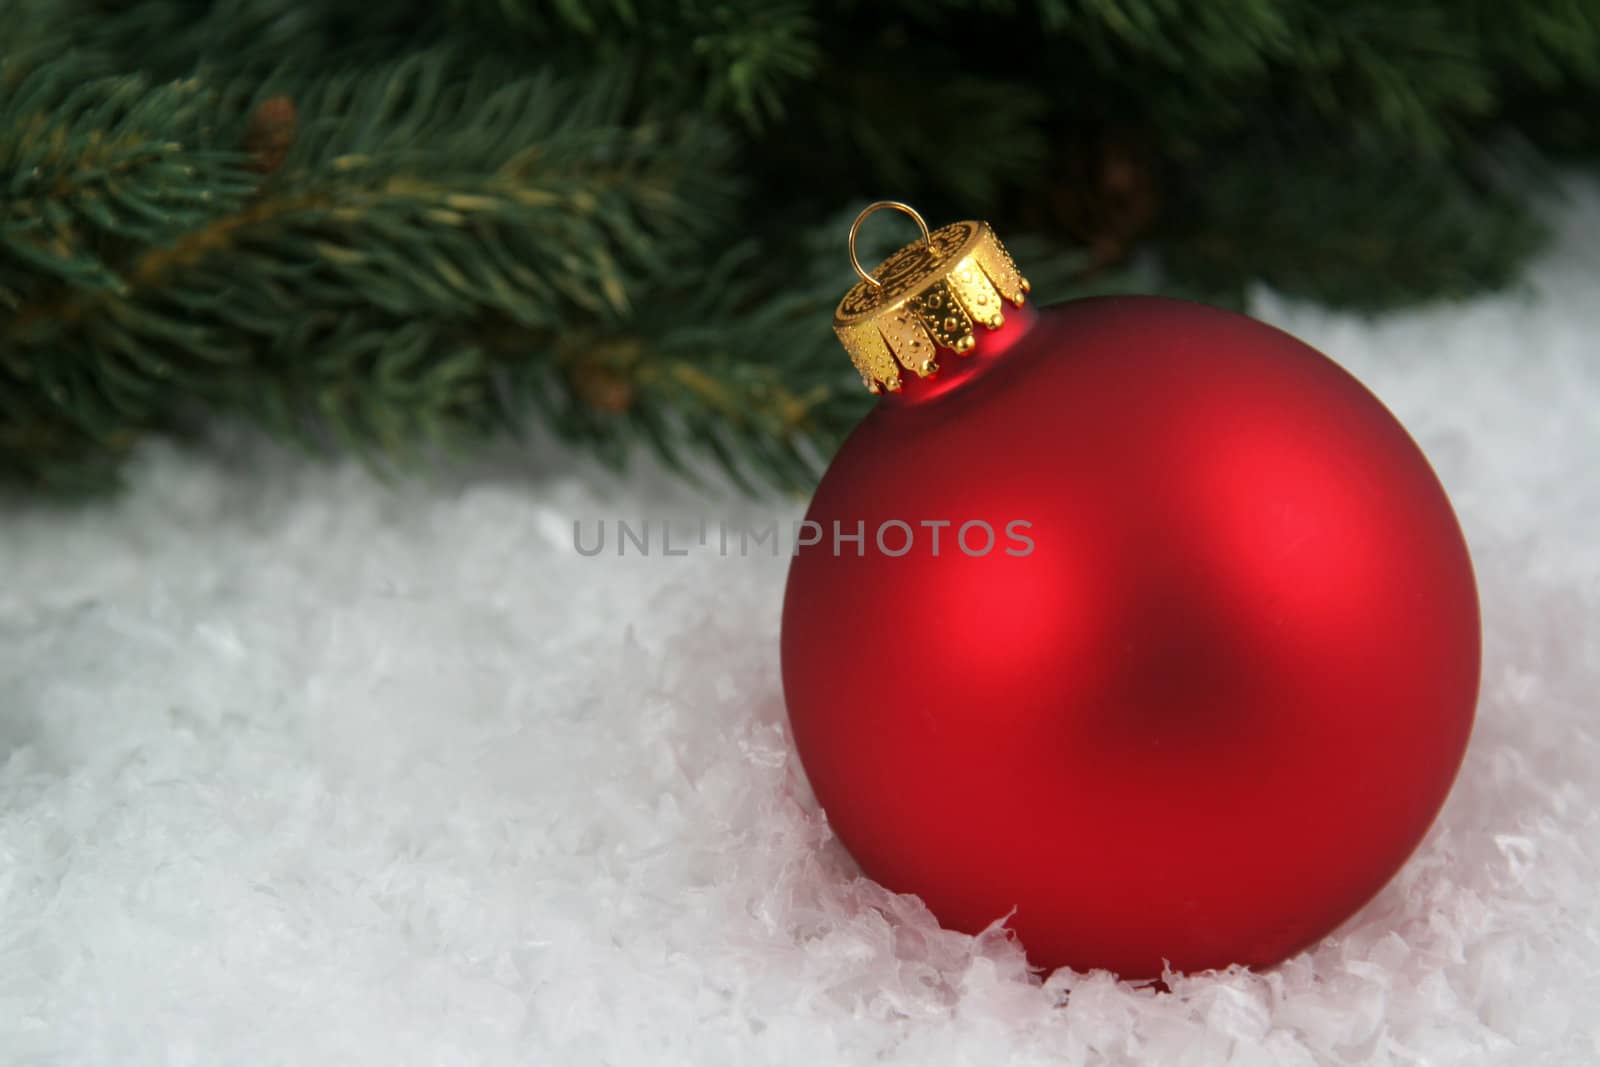 A red Christmas bauble sitting in a bed of snow.
